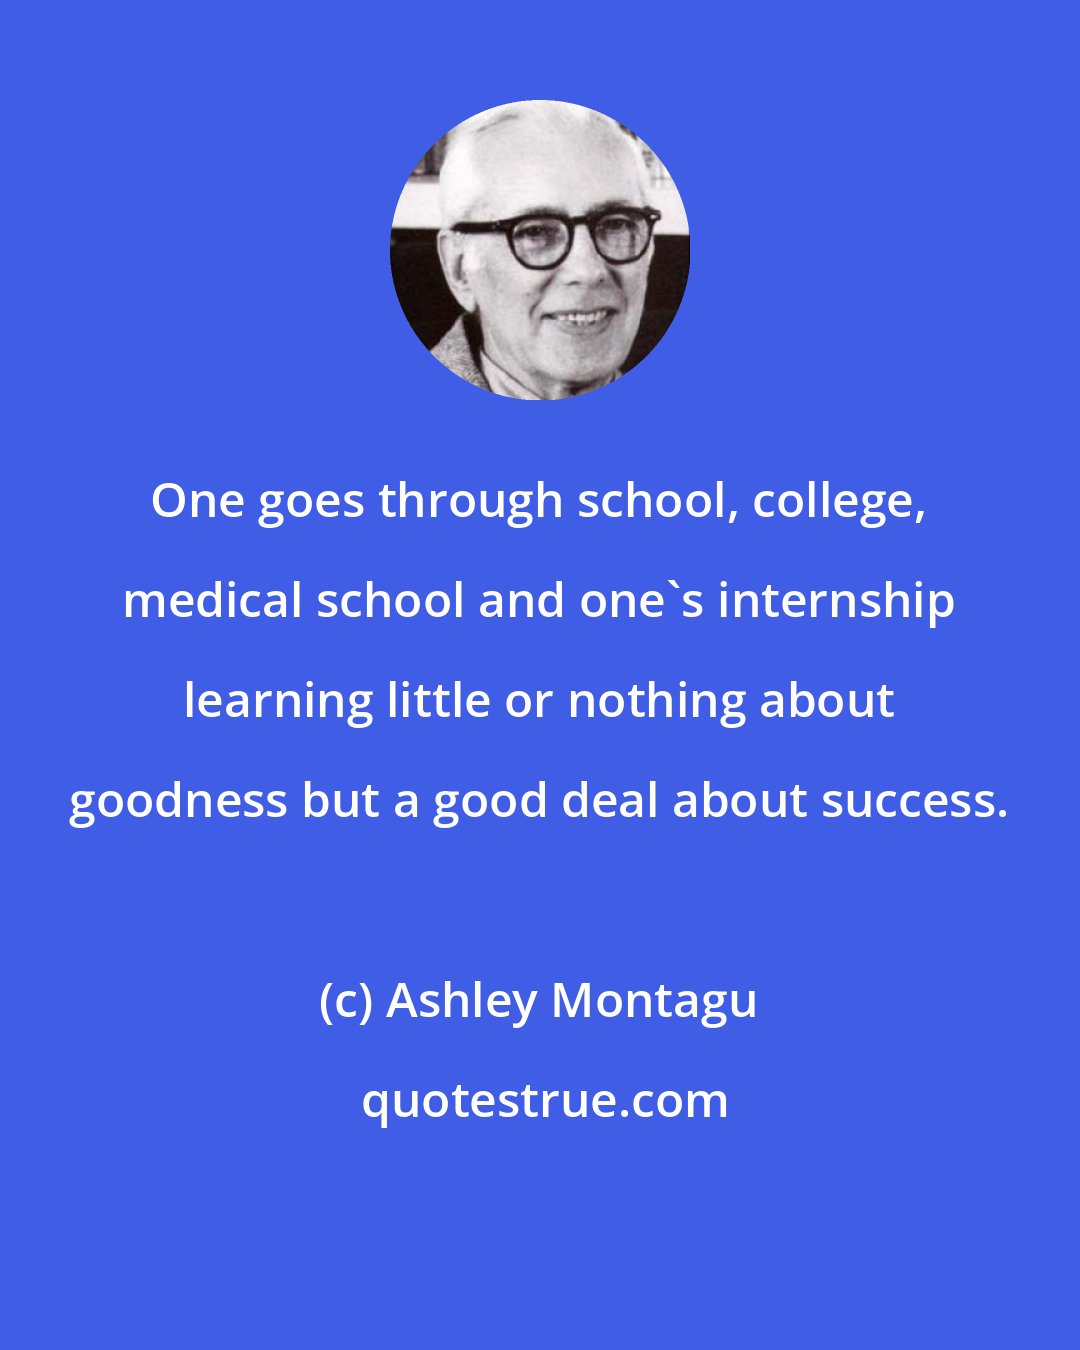 Ashley Montagu: One goes through school, college, medical school and one's internship learning little or nothing about goodness but a good deal about success.